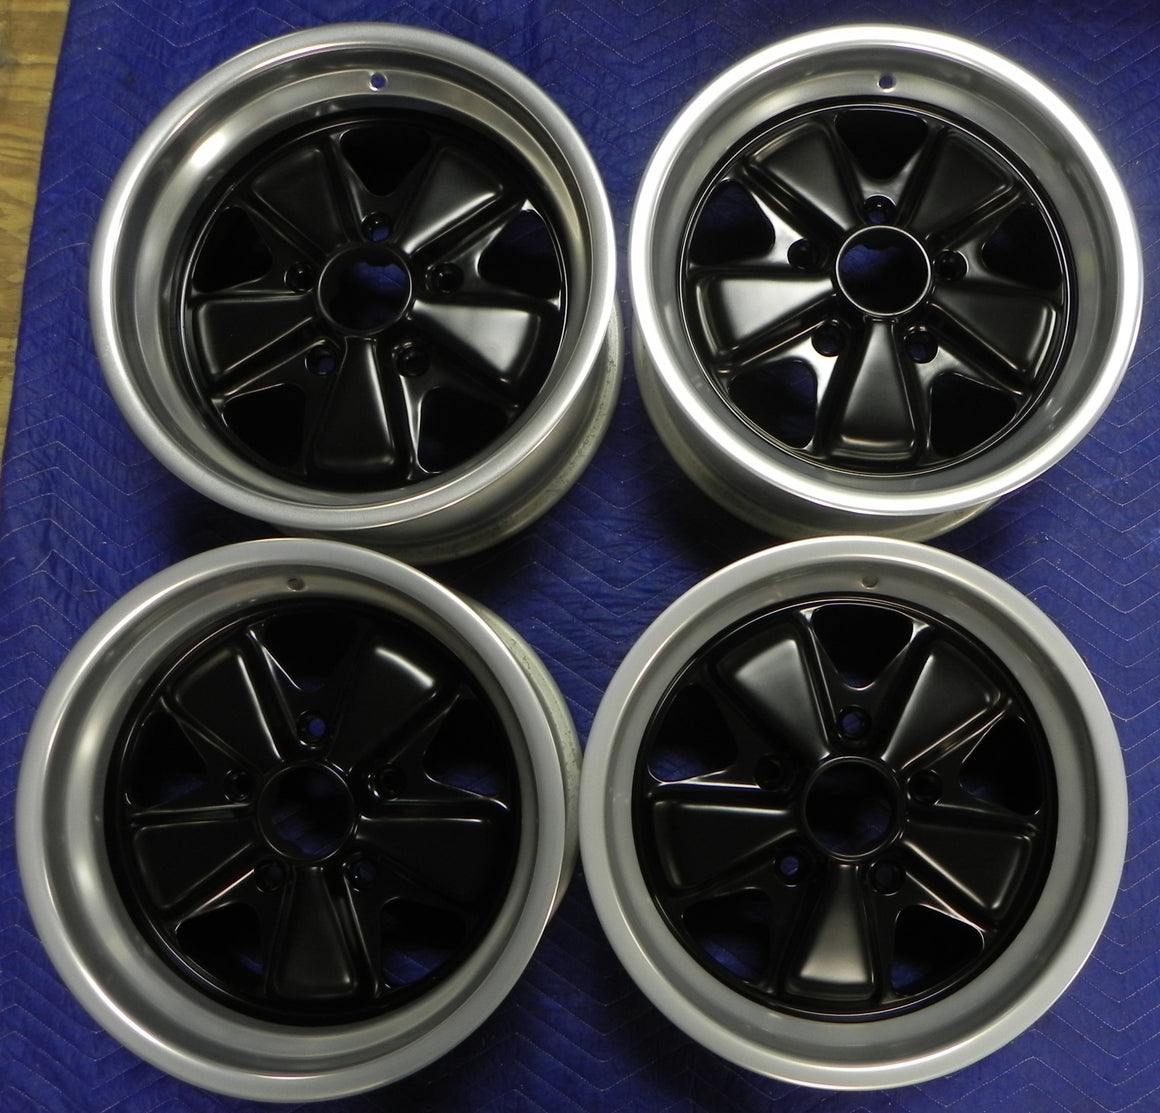 (New) Complete Set of Refinished 7jx15 & 8jx15 Fuchs Wheels - 1973-89